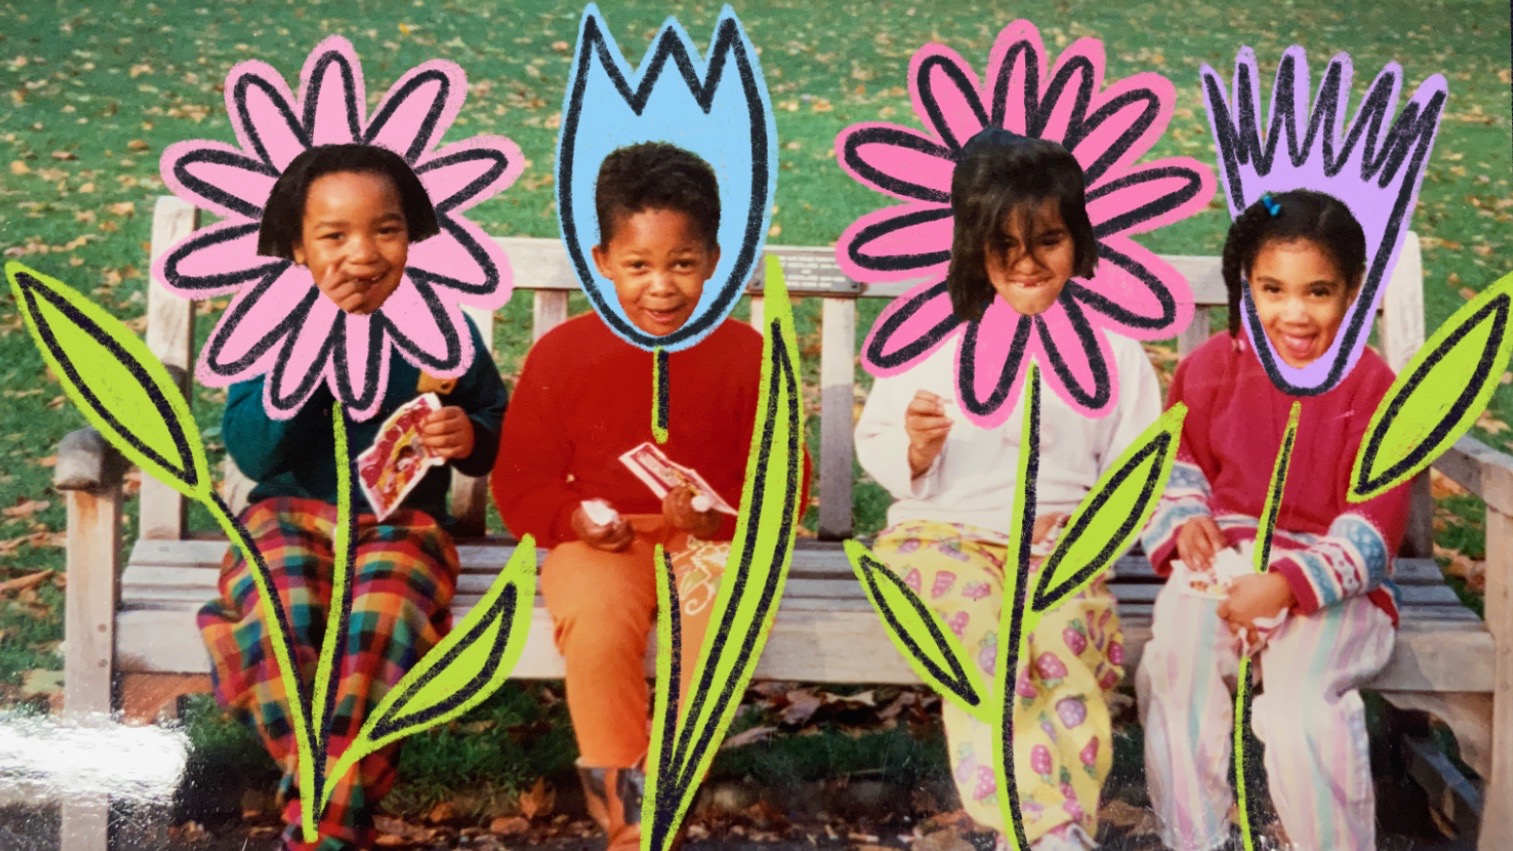 An illustrated image of four young children sitting on a park bench, with flowers that have been illustrated around their heads